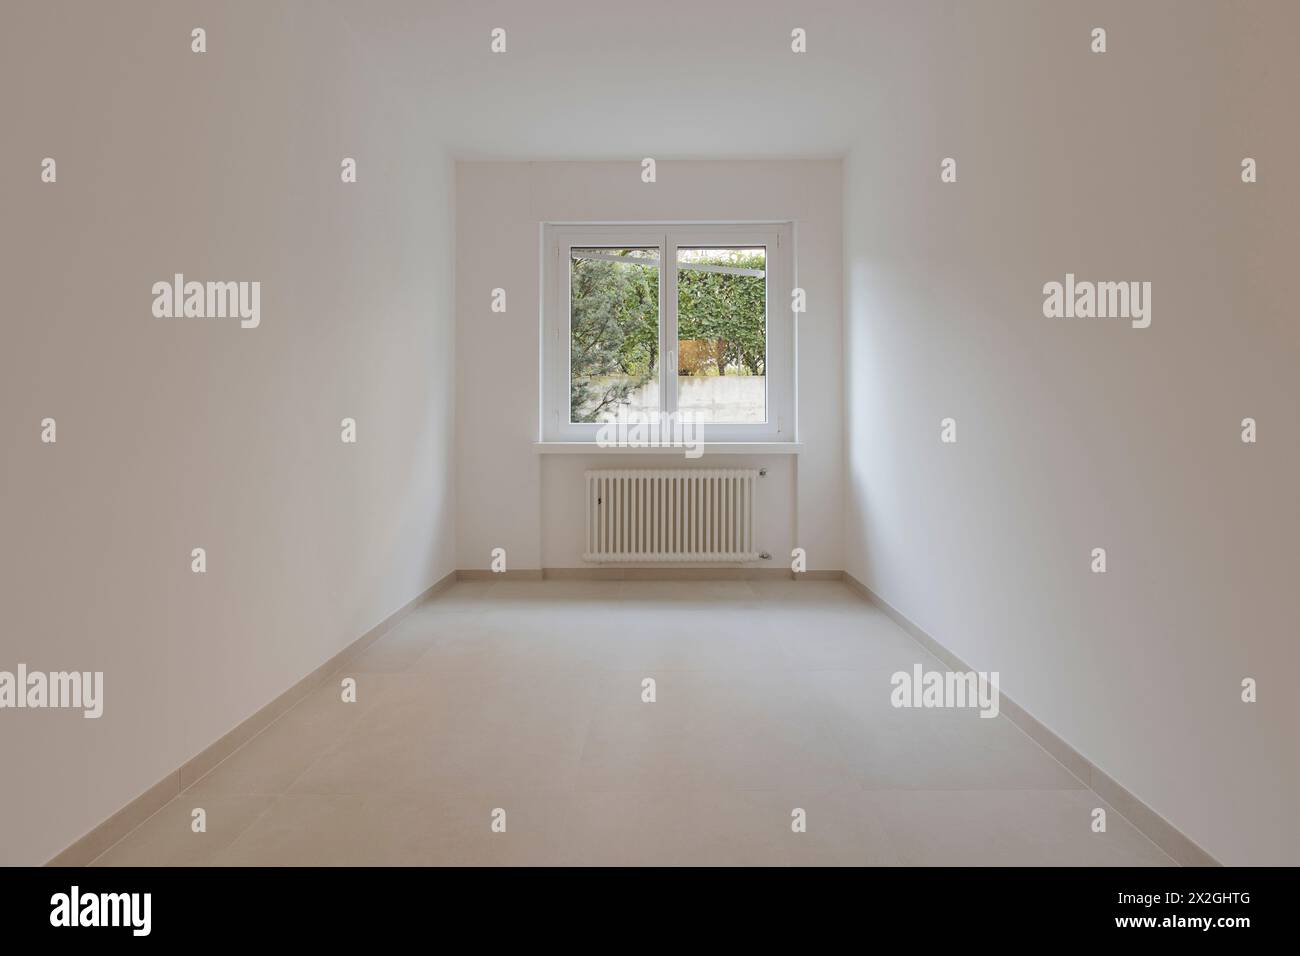 Empty interior of a room, with a central window in the background. Under the window a radiator. Stock Photo